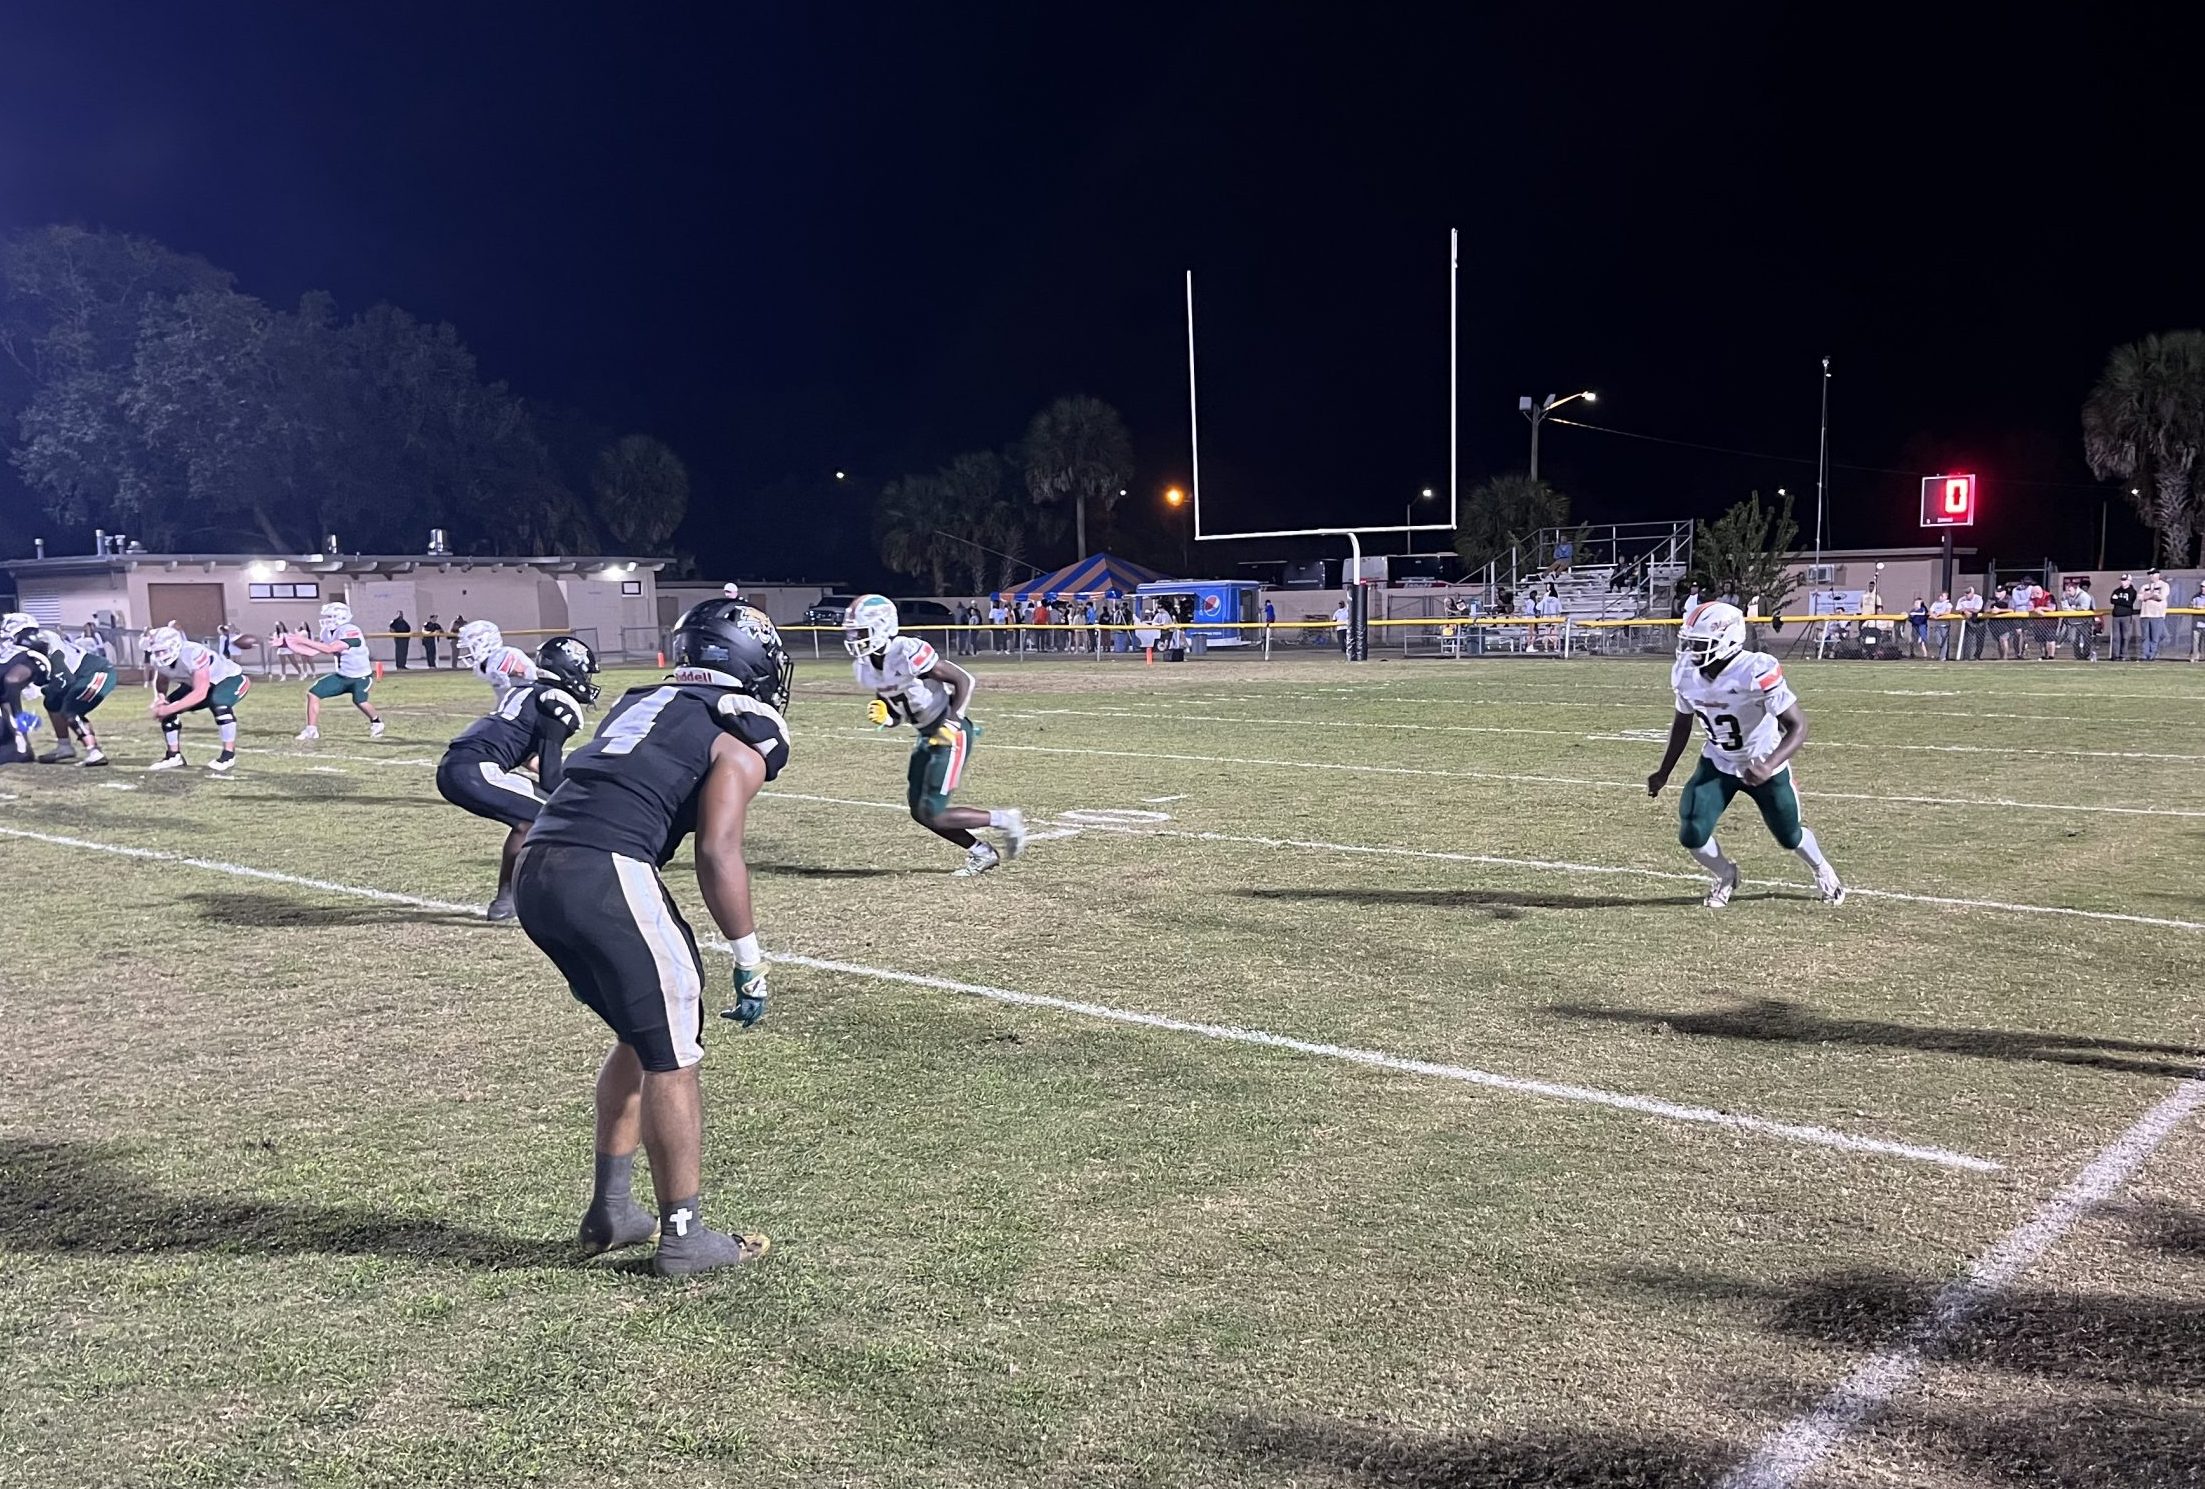 Buchholz Bobcats Dominate Mosley Dolphins 59-0, Secure Spot in Regional Semifinals